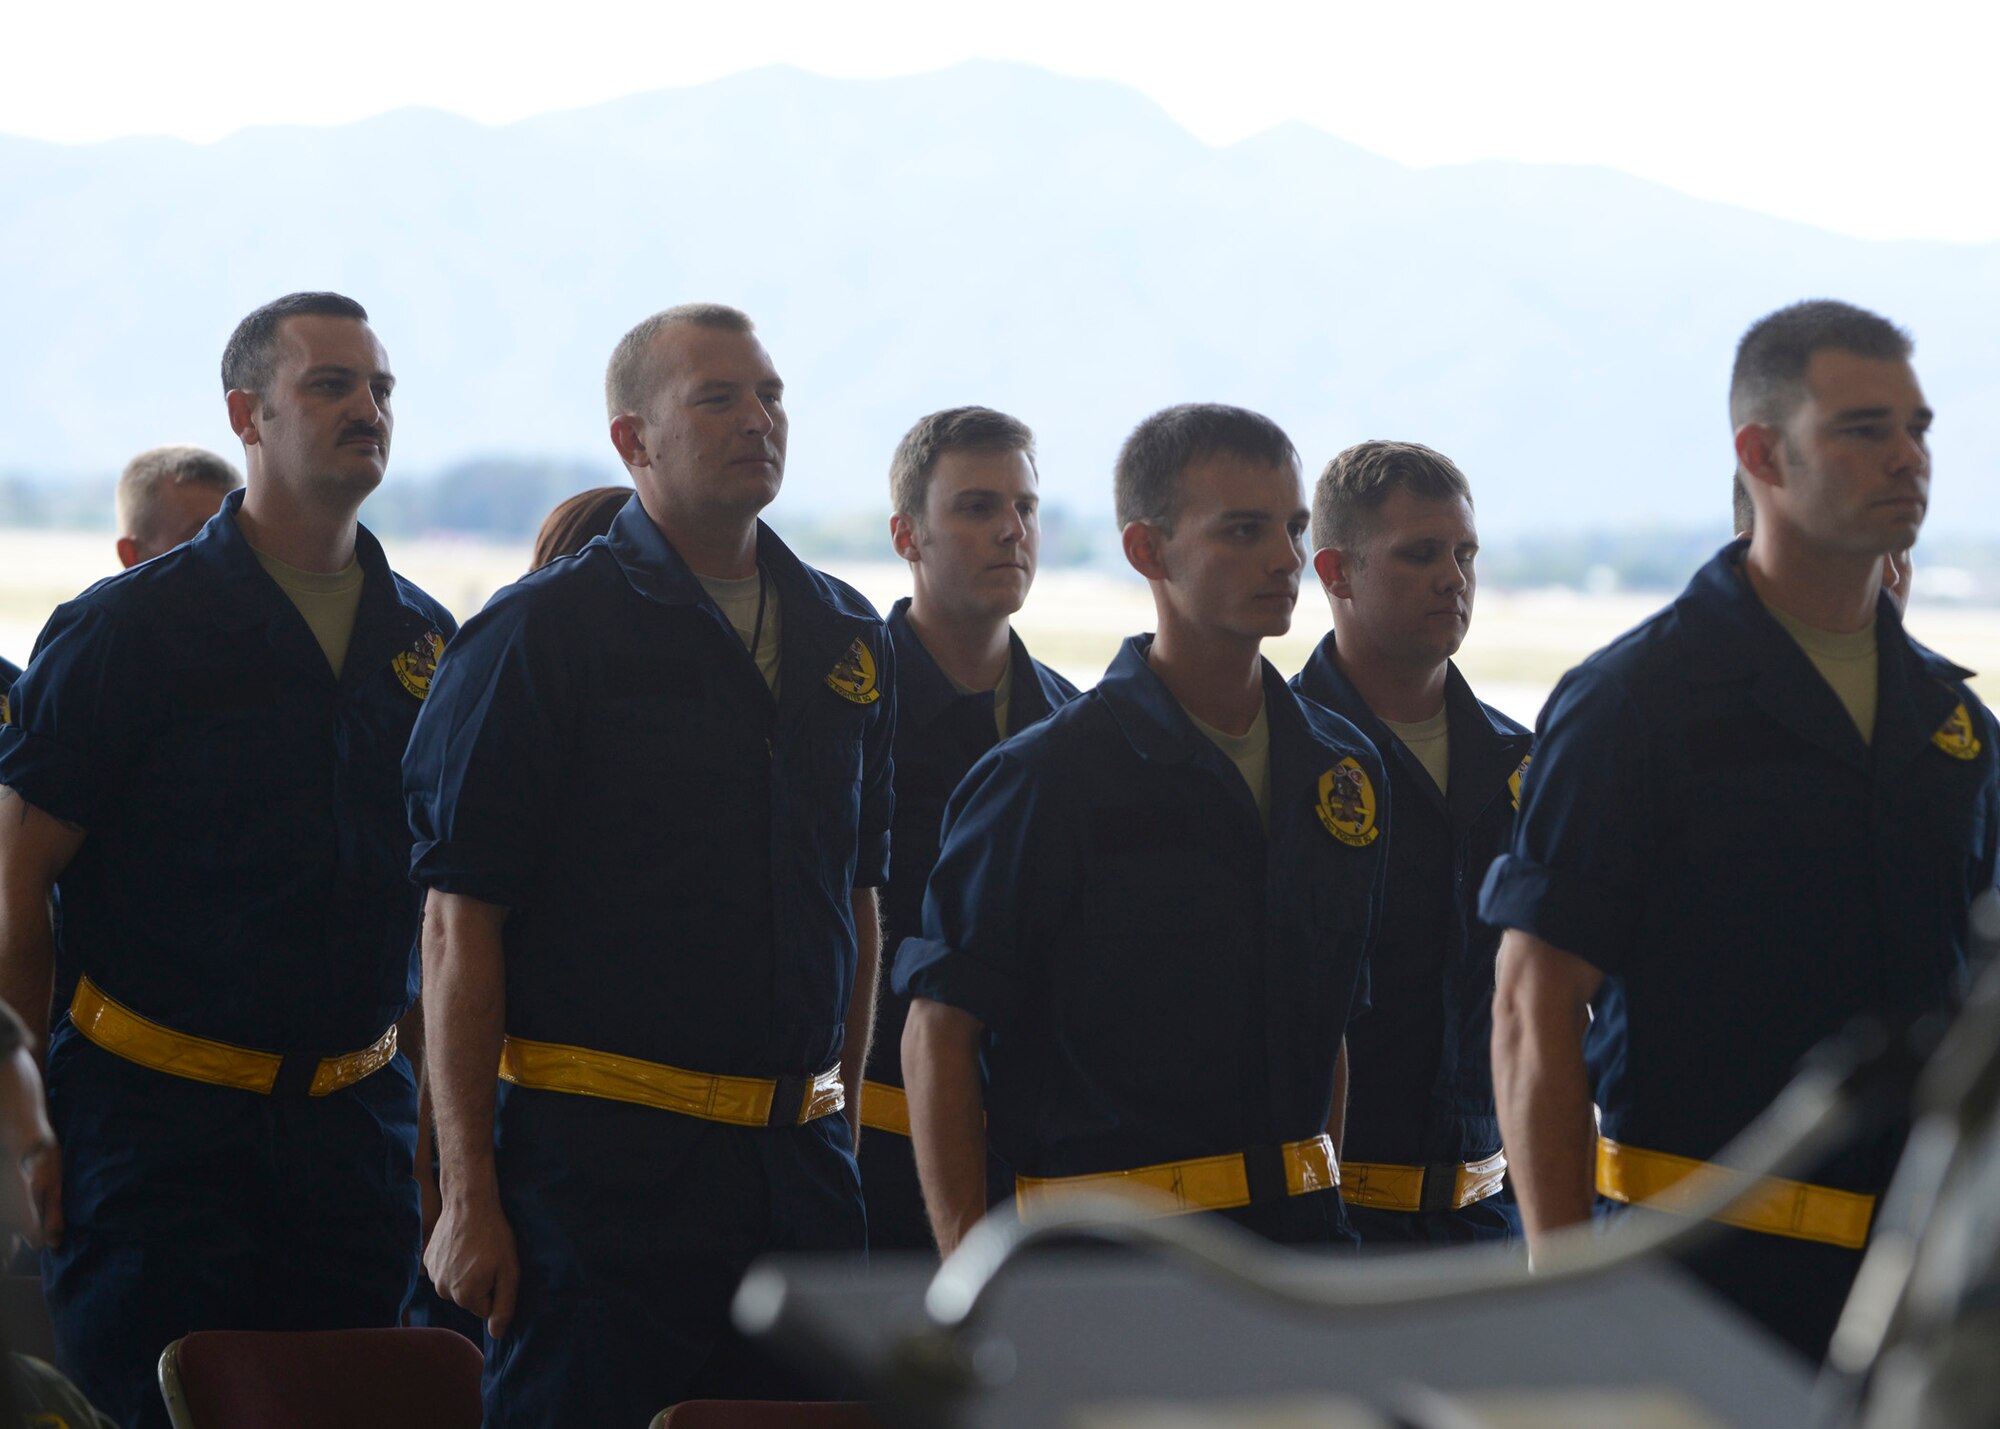 Members of the 61st Aircraft Maintenance Unit dedicated crew chiefs prepare to recite the Mechanic’s Creed during the recognition ceremony at Luke Air Force Base, Arizona, Jan. 23, 2015. Seventeen dedicated crew chiefs were each assigned to an F-35 Lightning II joint strike fighter. (U.S. Air Force photo/Senior Airman Devante Williams)